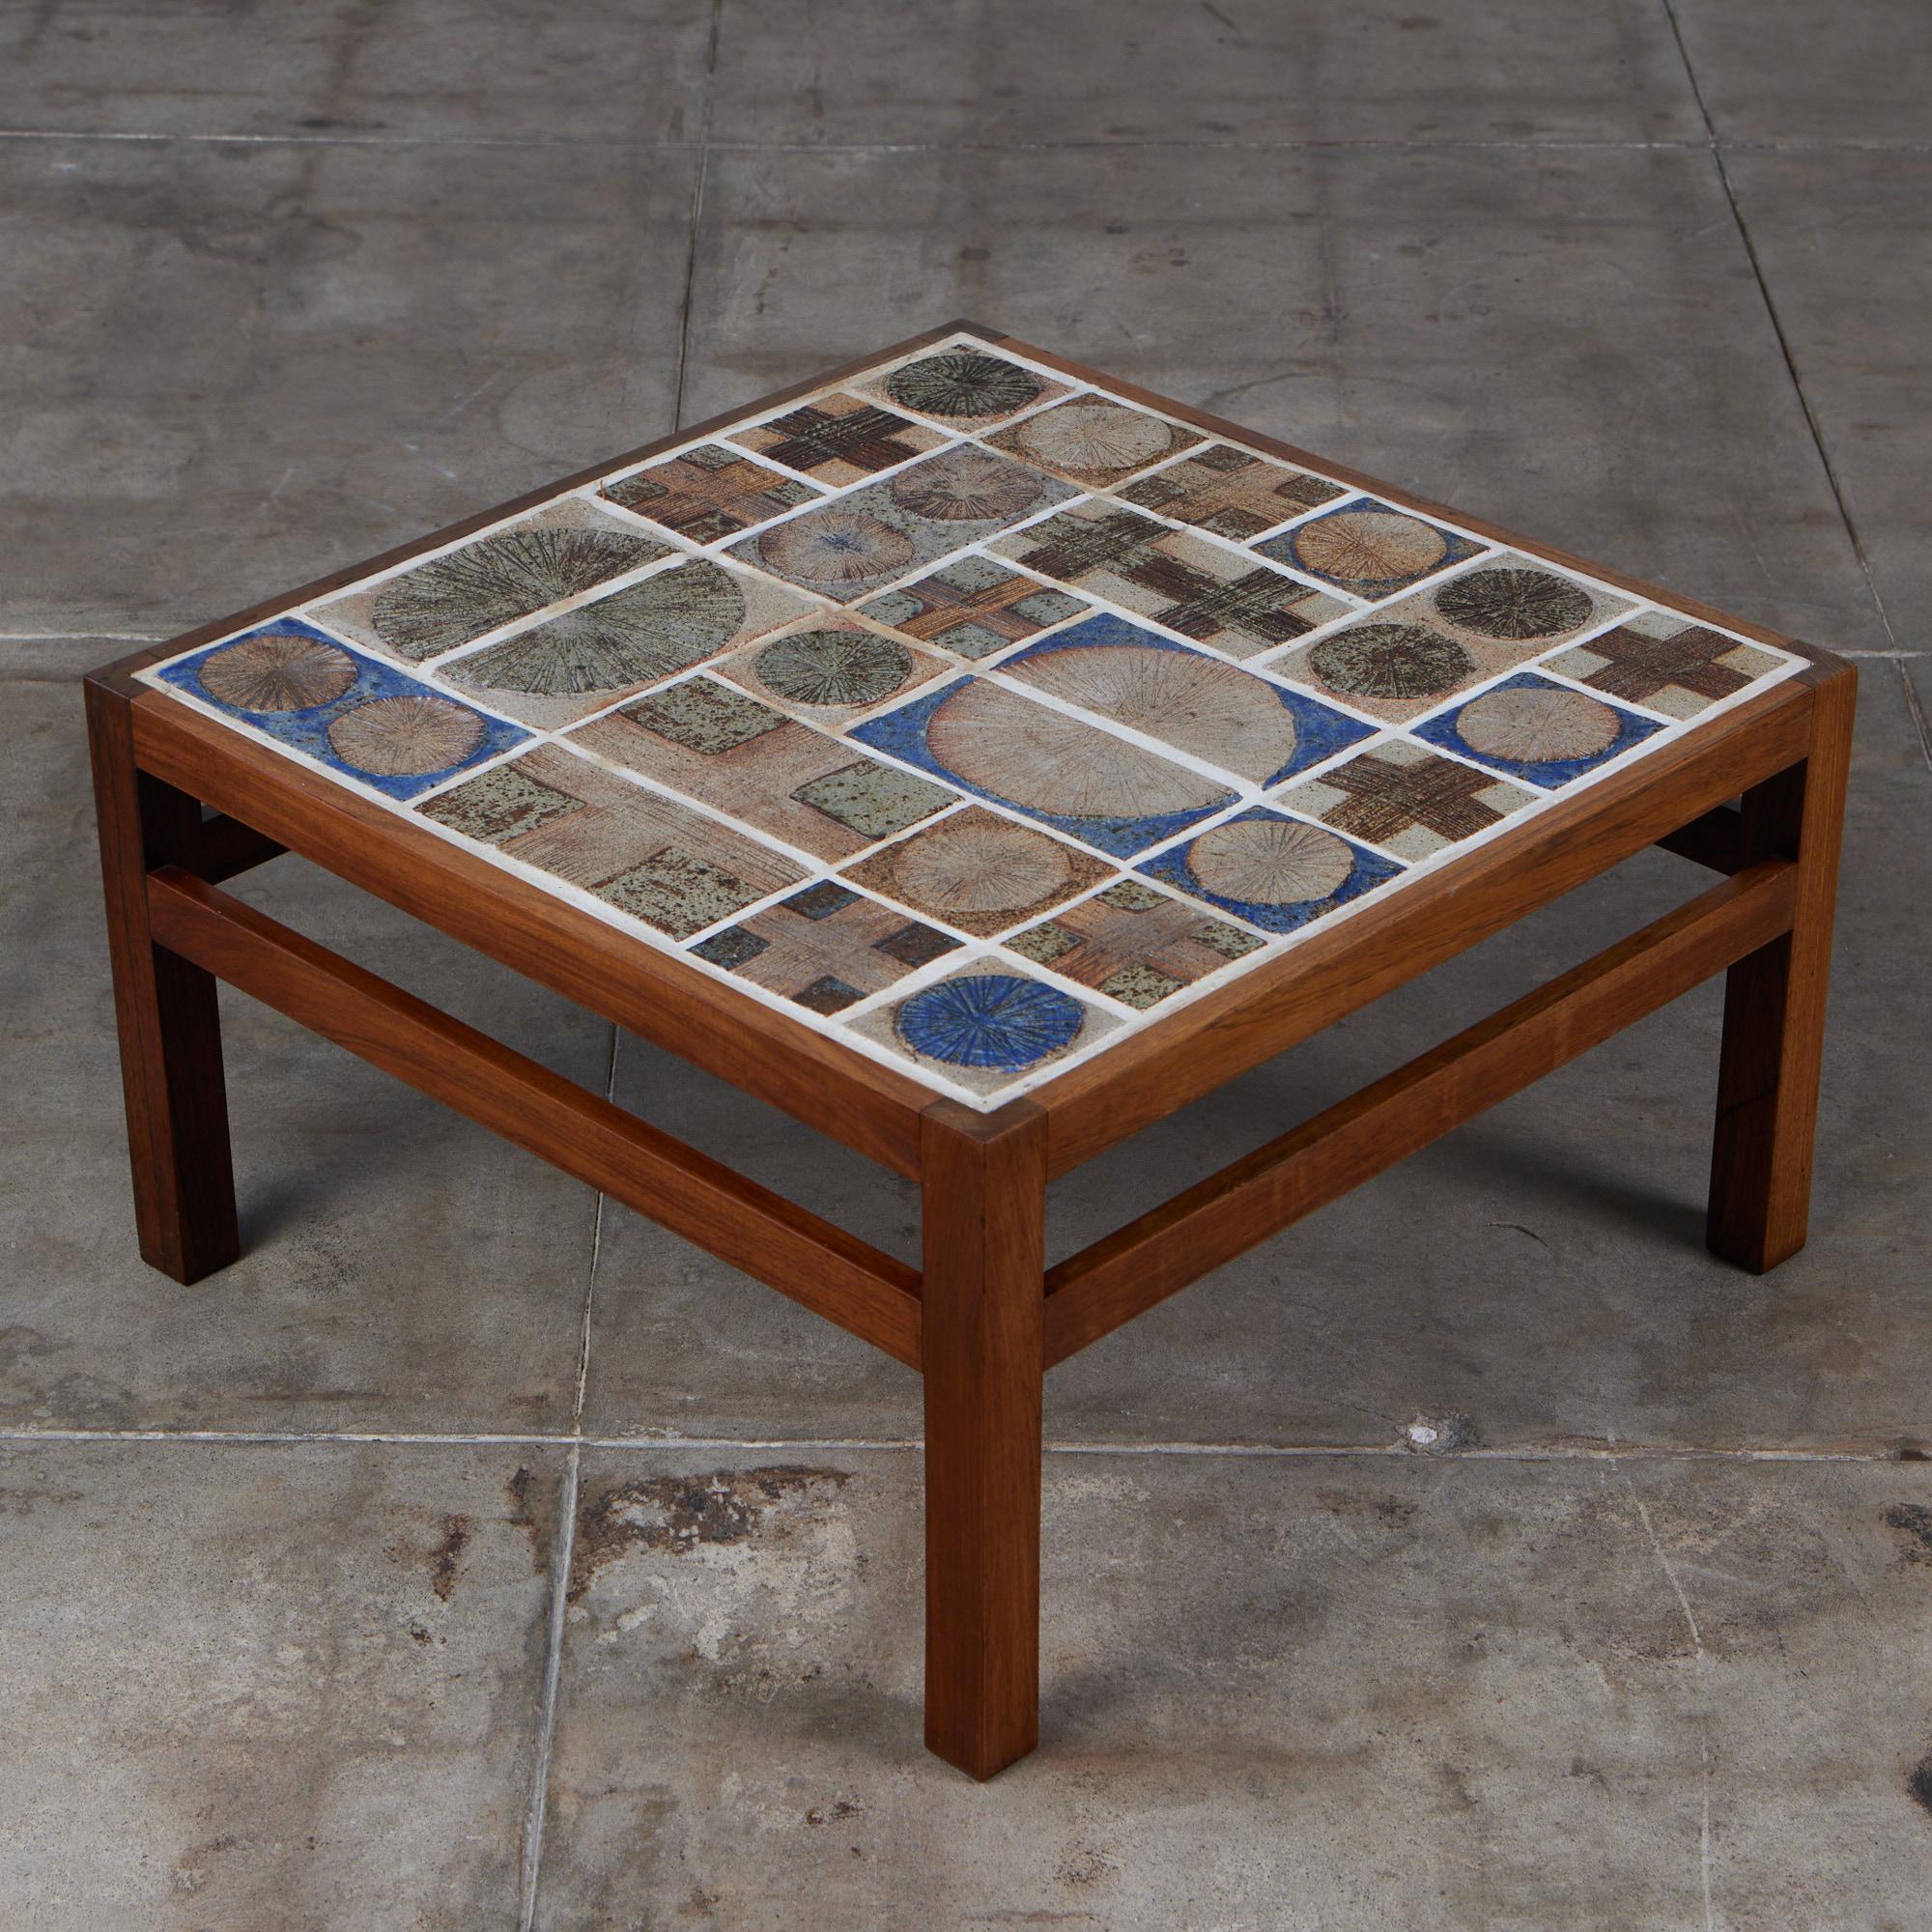 Danish Tue Poulsen Rosewood and Mosaic Tile Coffee Table